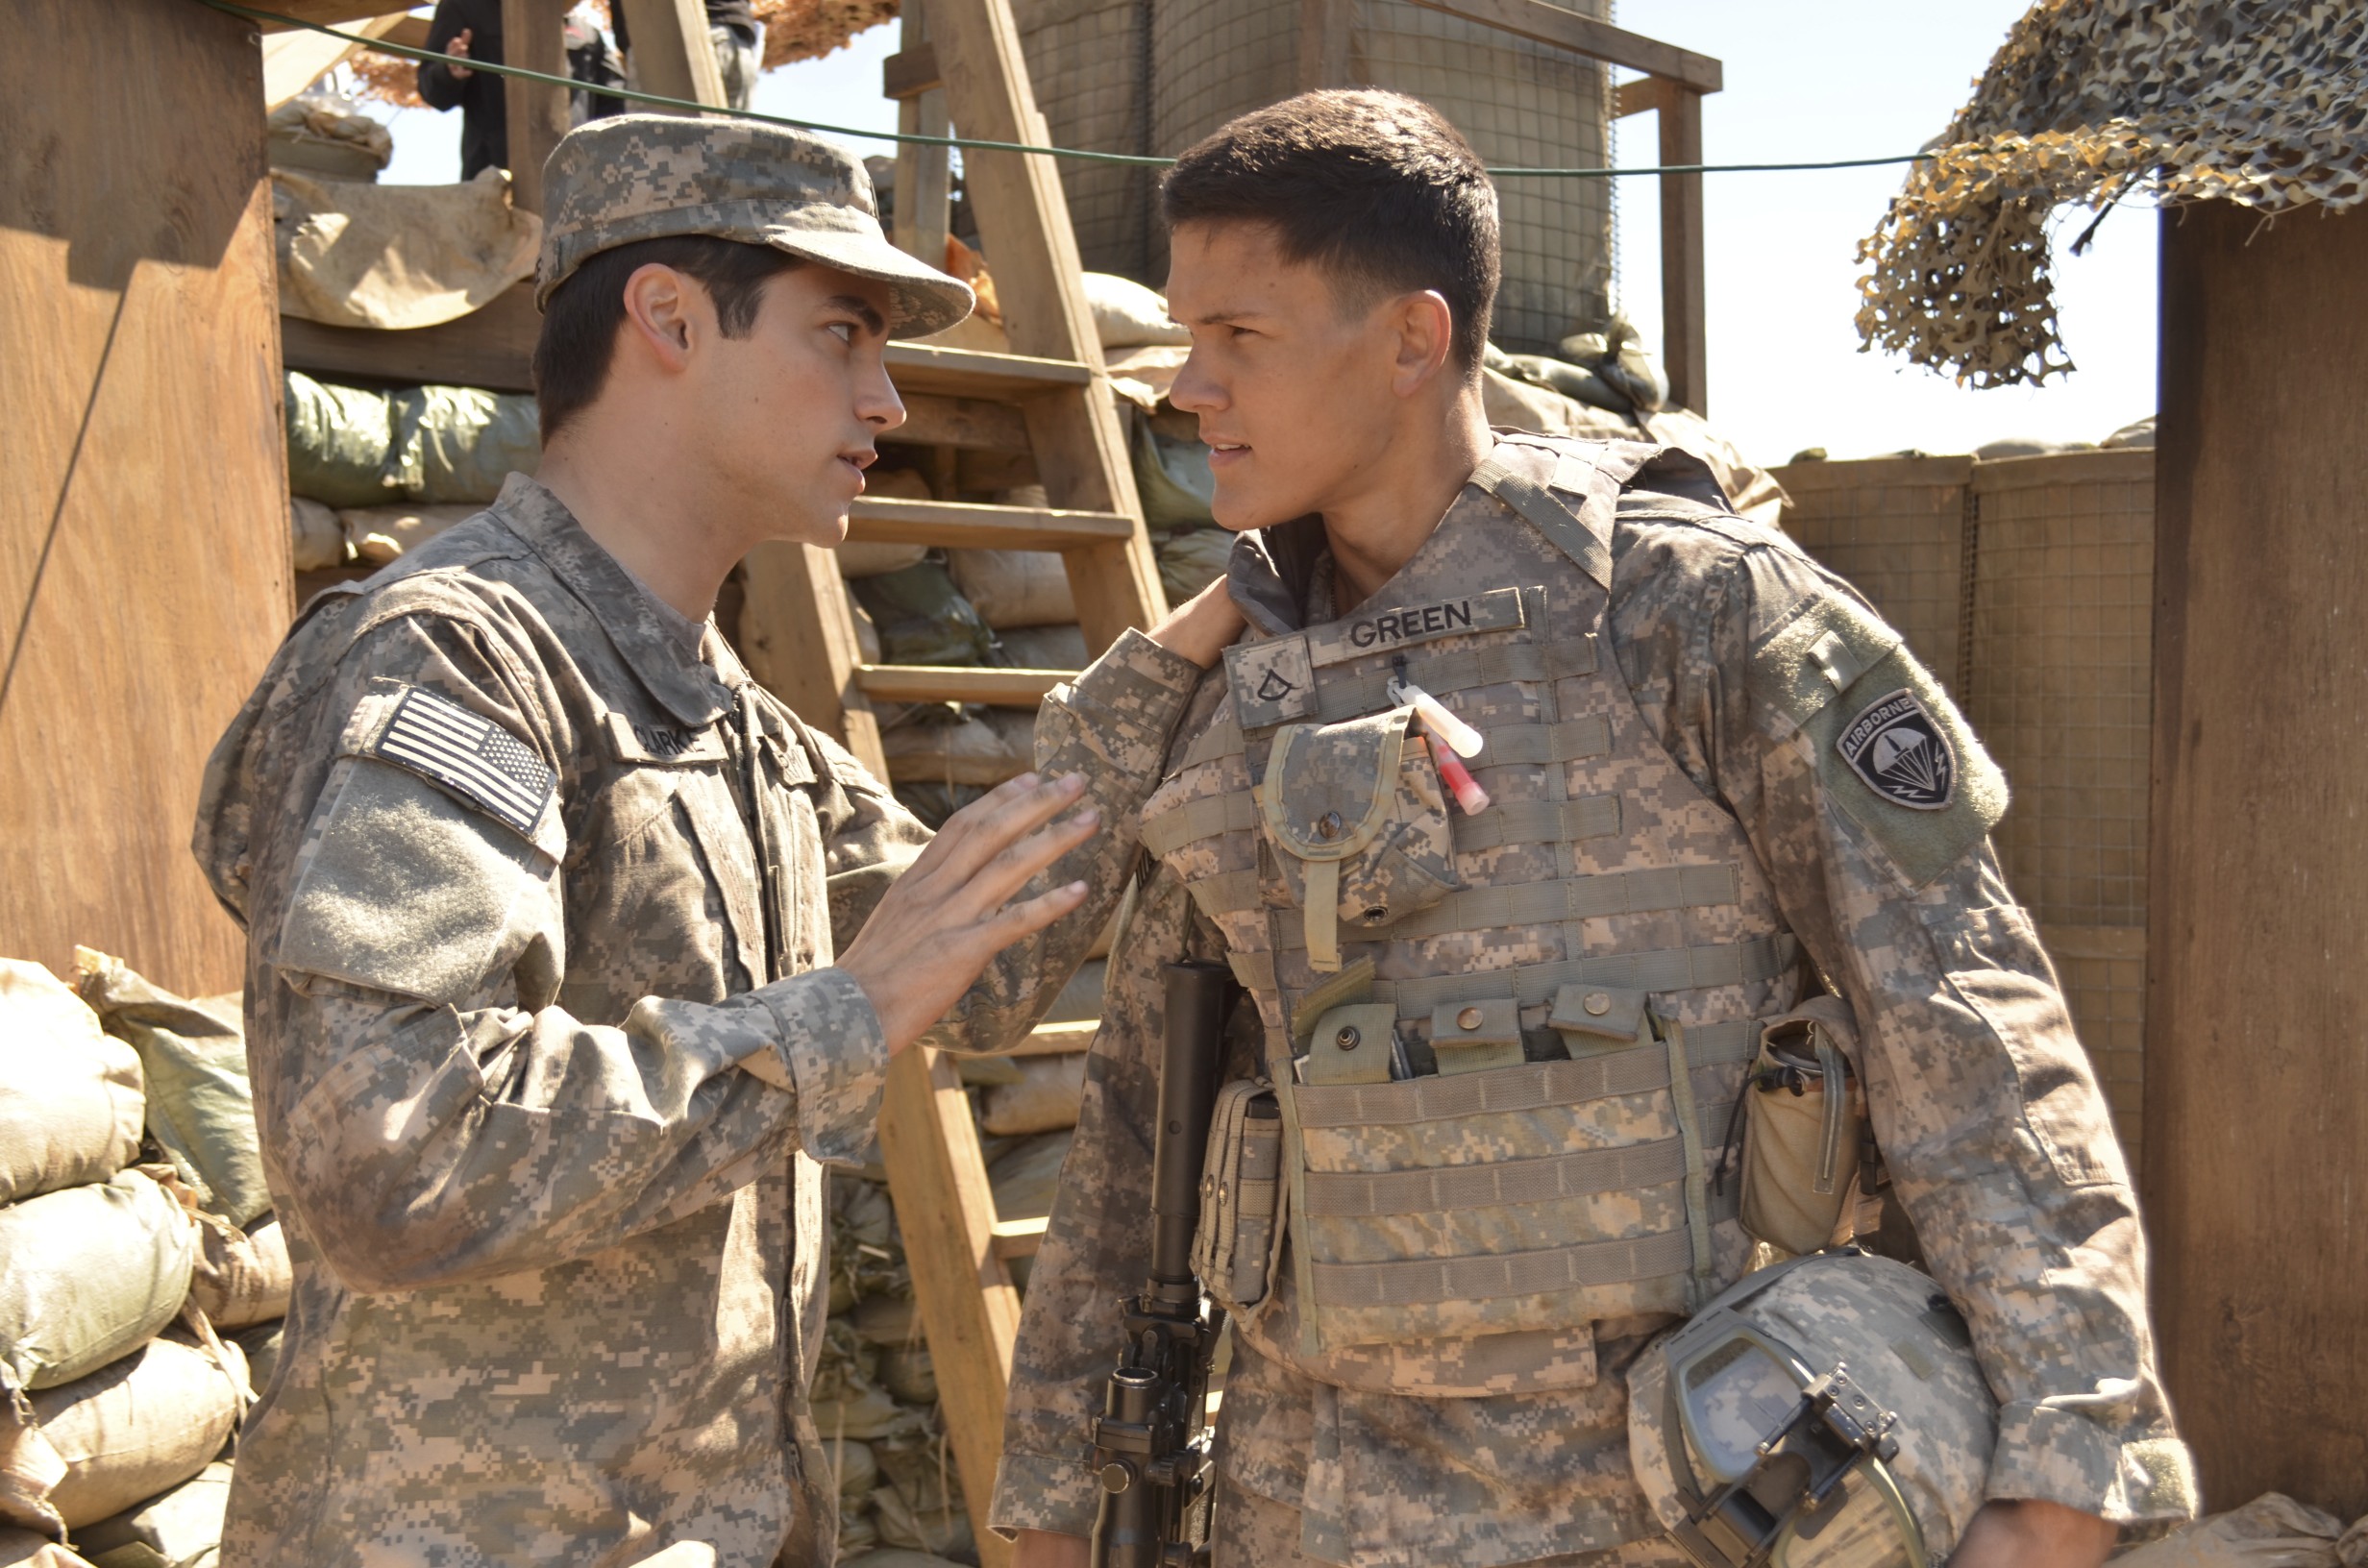 David Gridley, Brant Daugherty- Army Wives/PFC Green